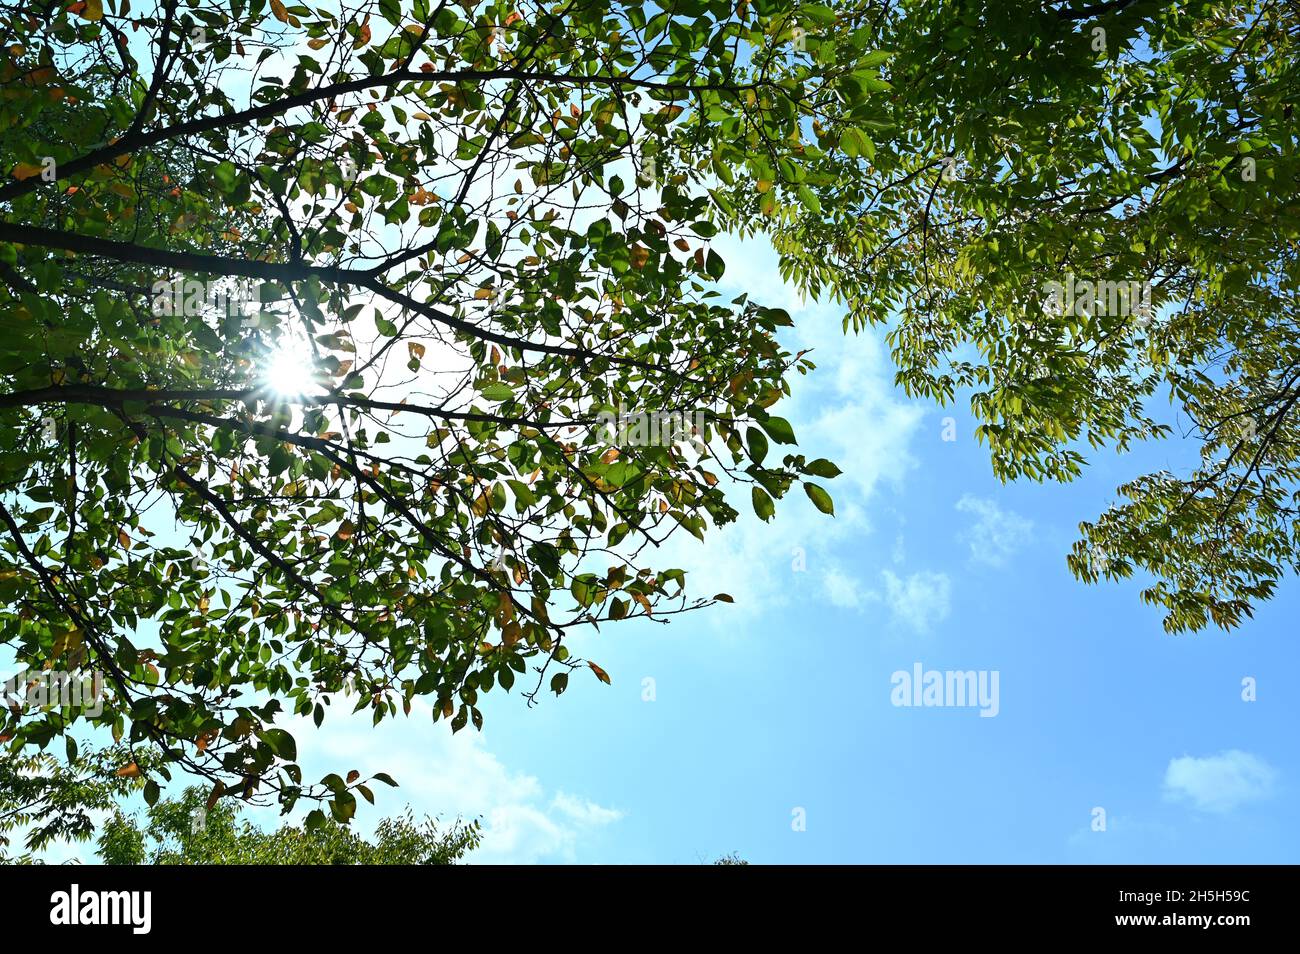 The dazzling sun rises in the sunny sky, and sunlight comes through the branches. Stock Photo